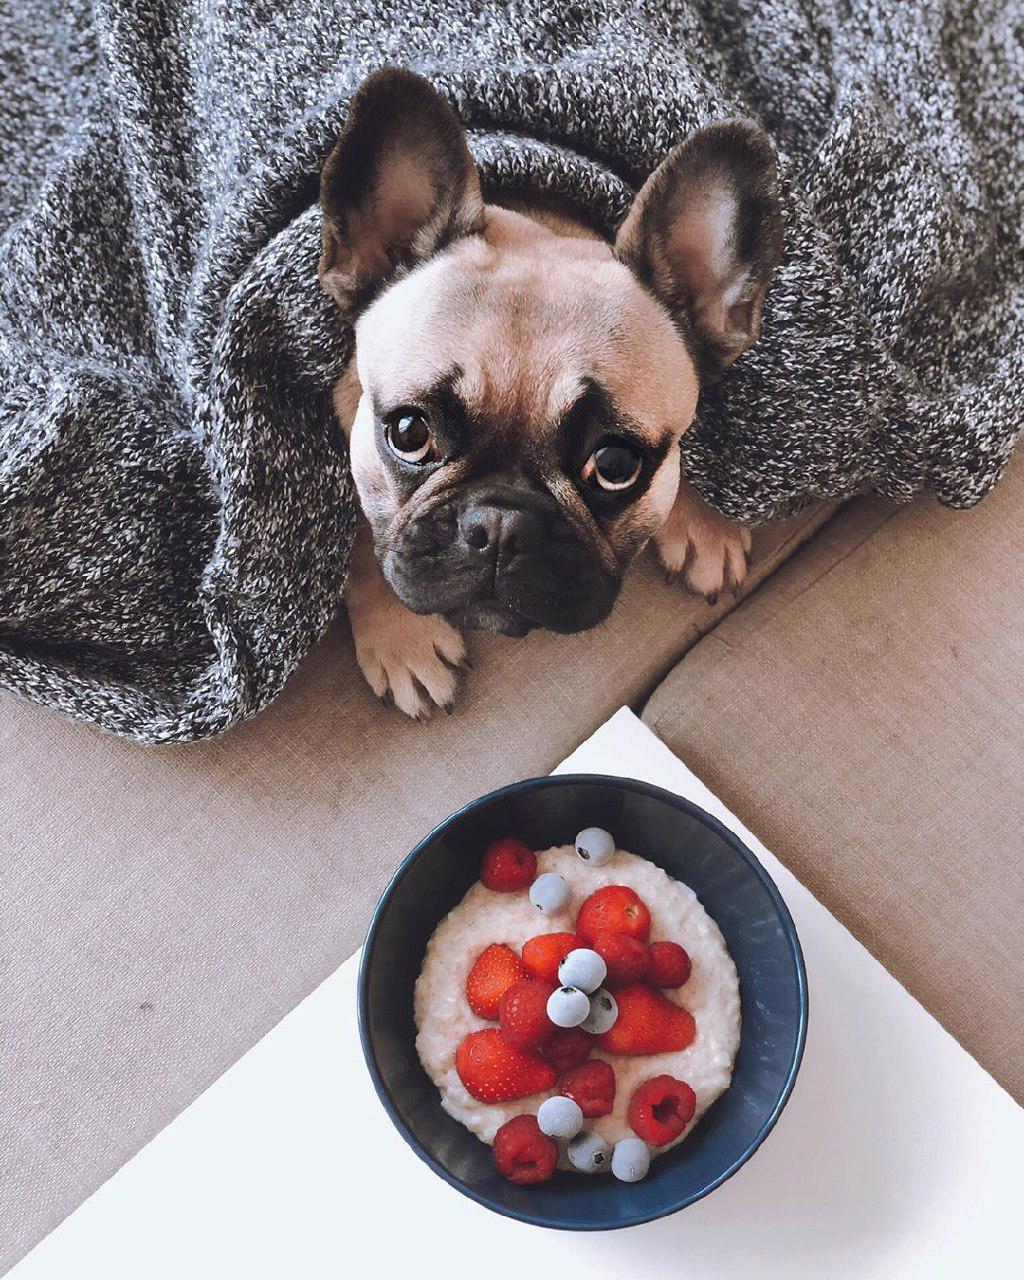 A French Bulldog lying under the blanket on the couch while showing its begging face behind the bowl of food